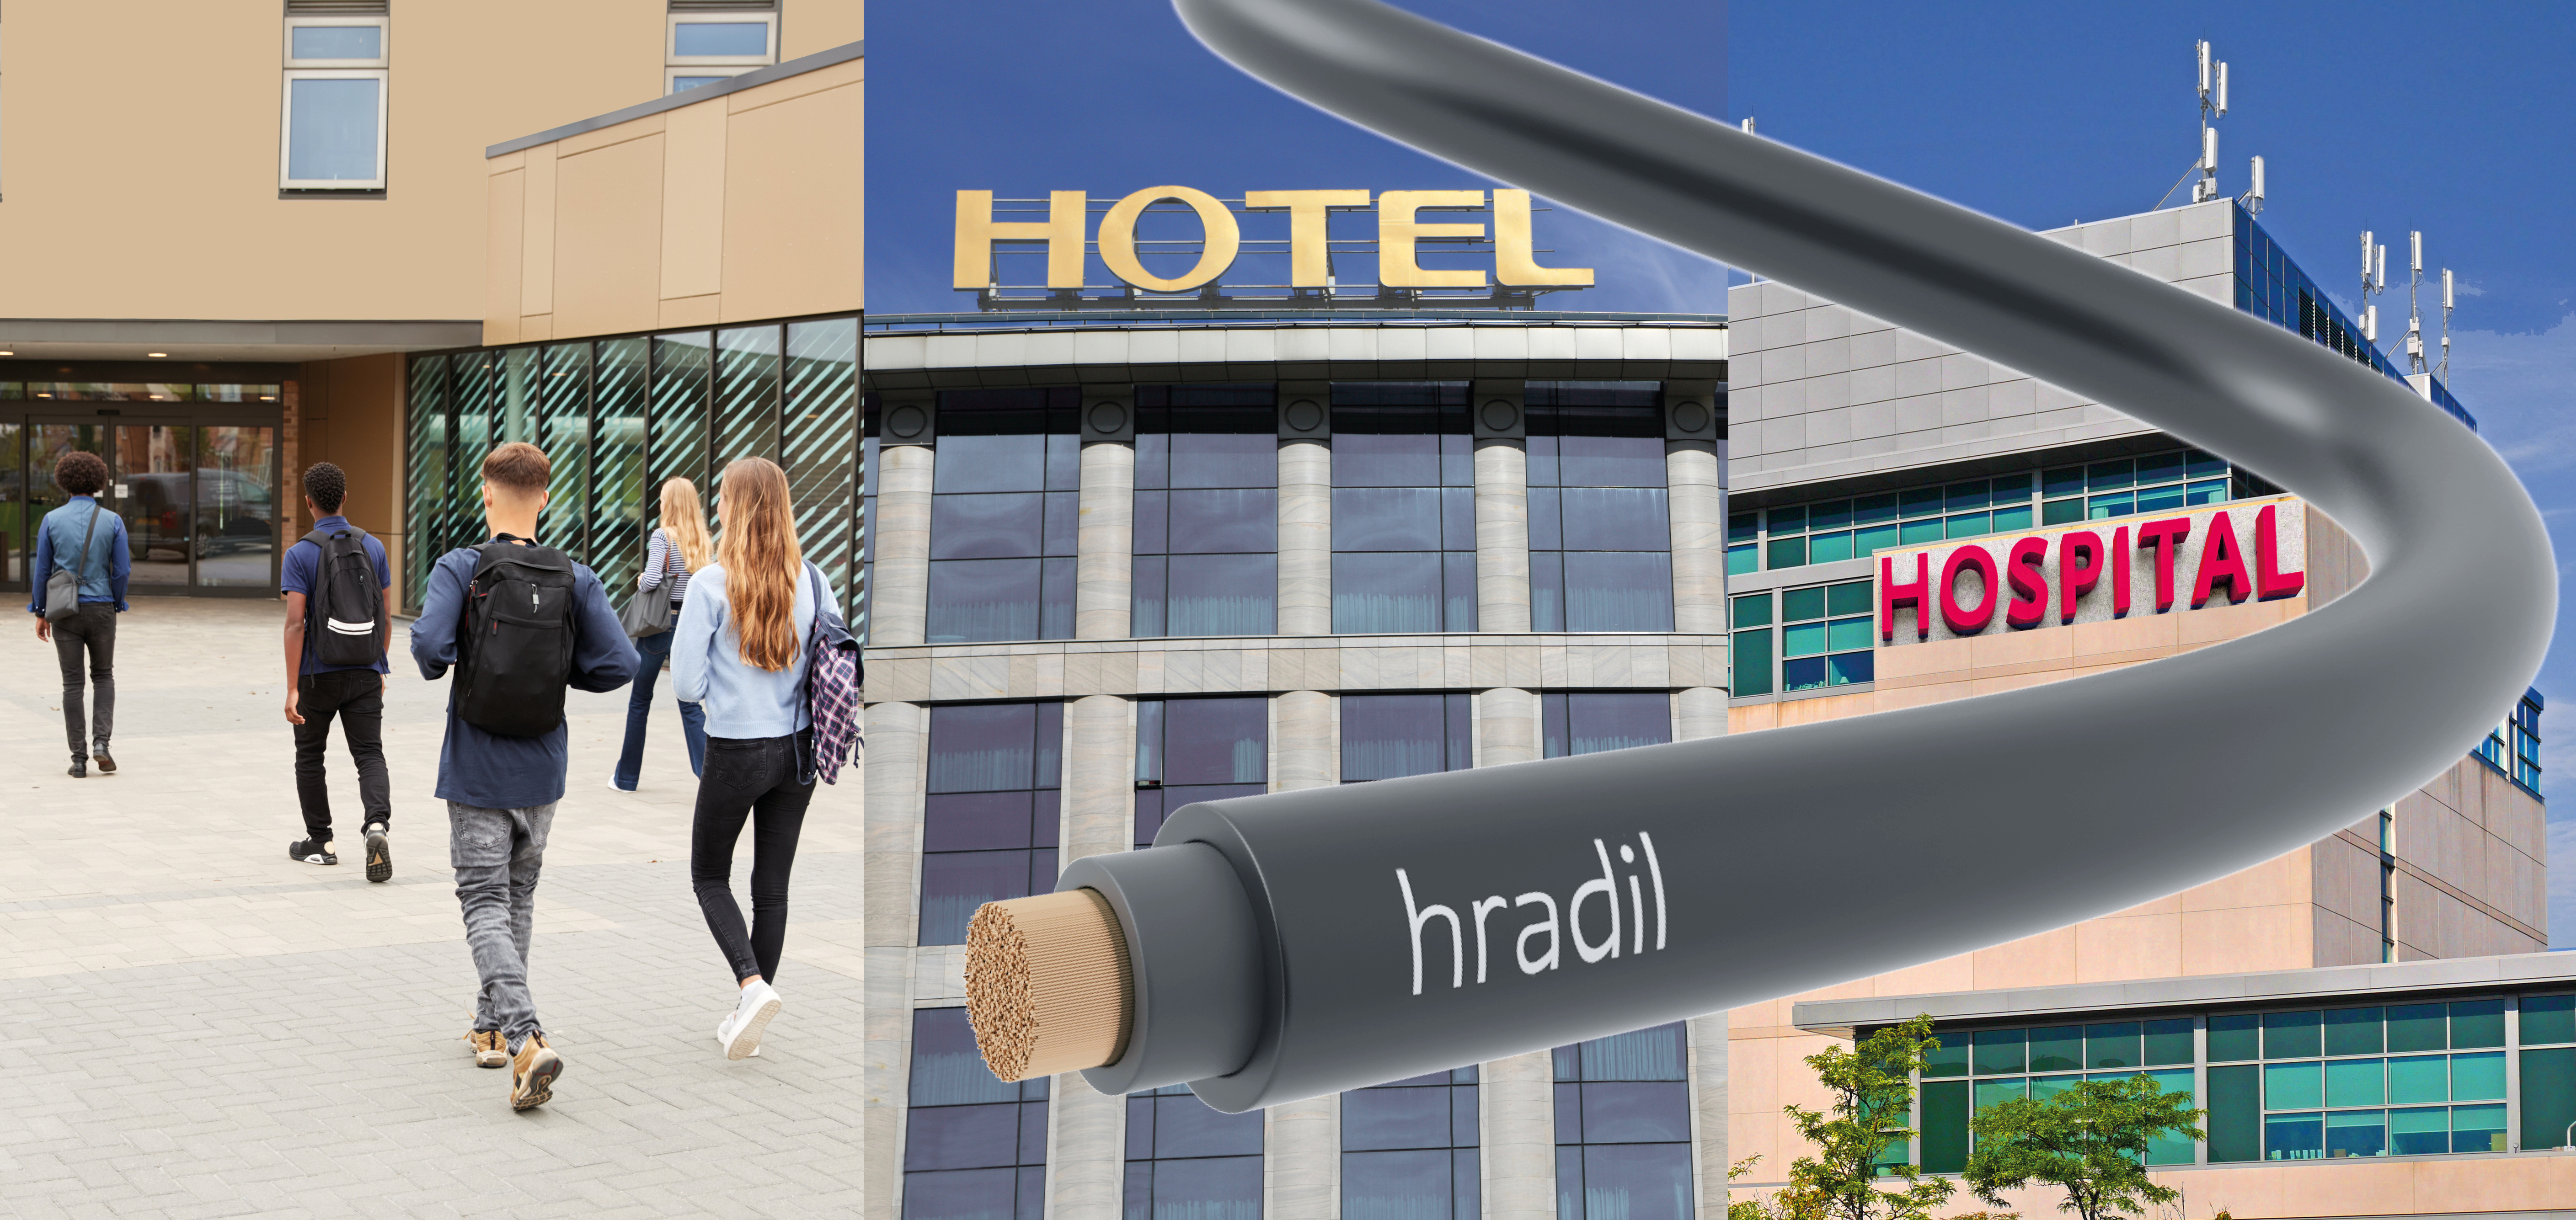 Safer Cables for Public Spaces thanks to the HRADIL SECURE safety cable. 